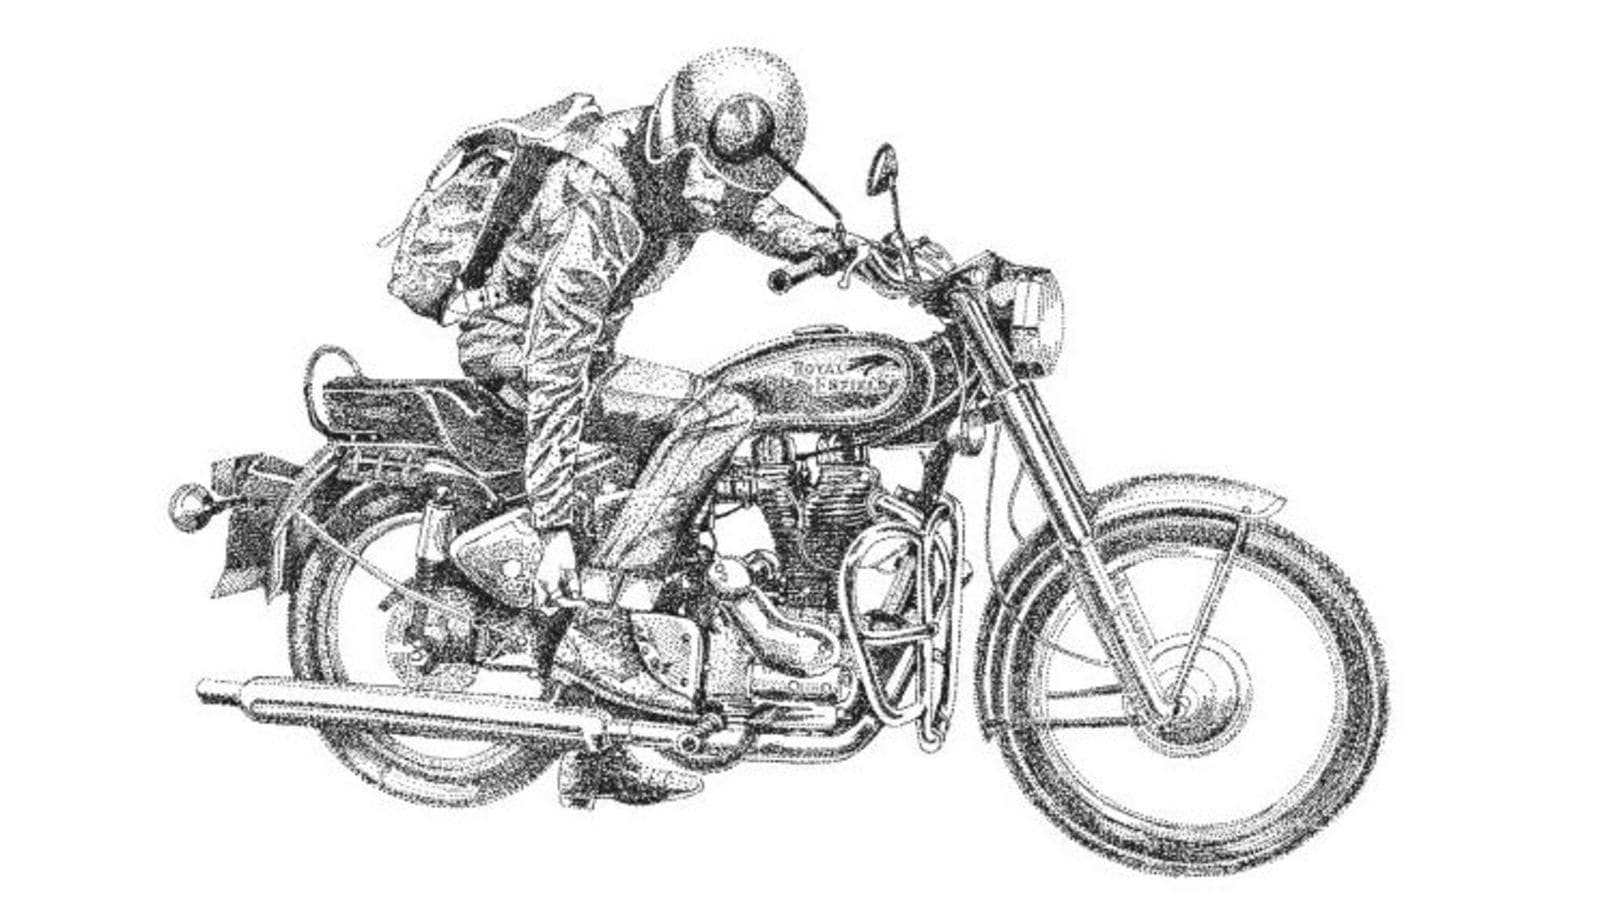 ROYAL ENFIELD Bullet Engine - Exploded view Technical Drawing..A3 size |  eBay